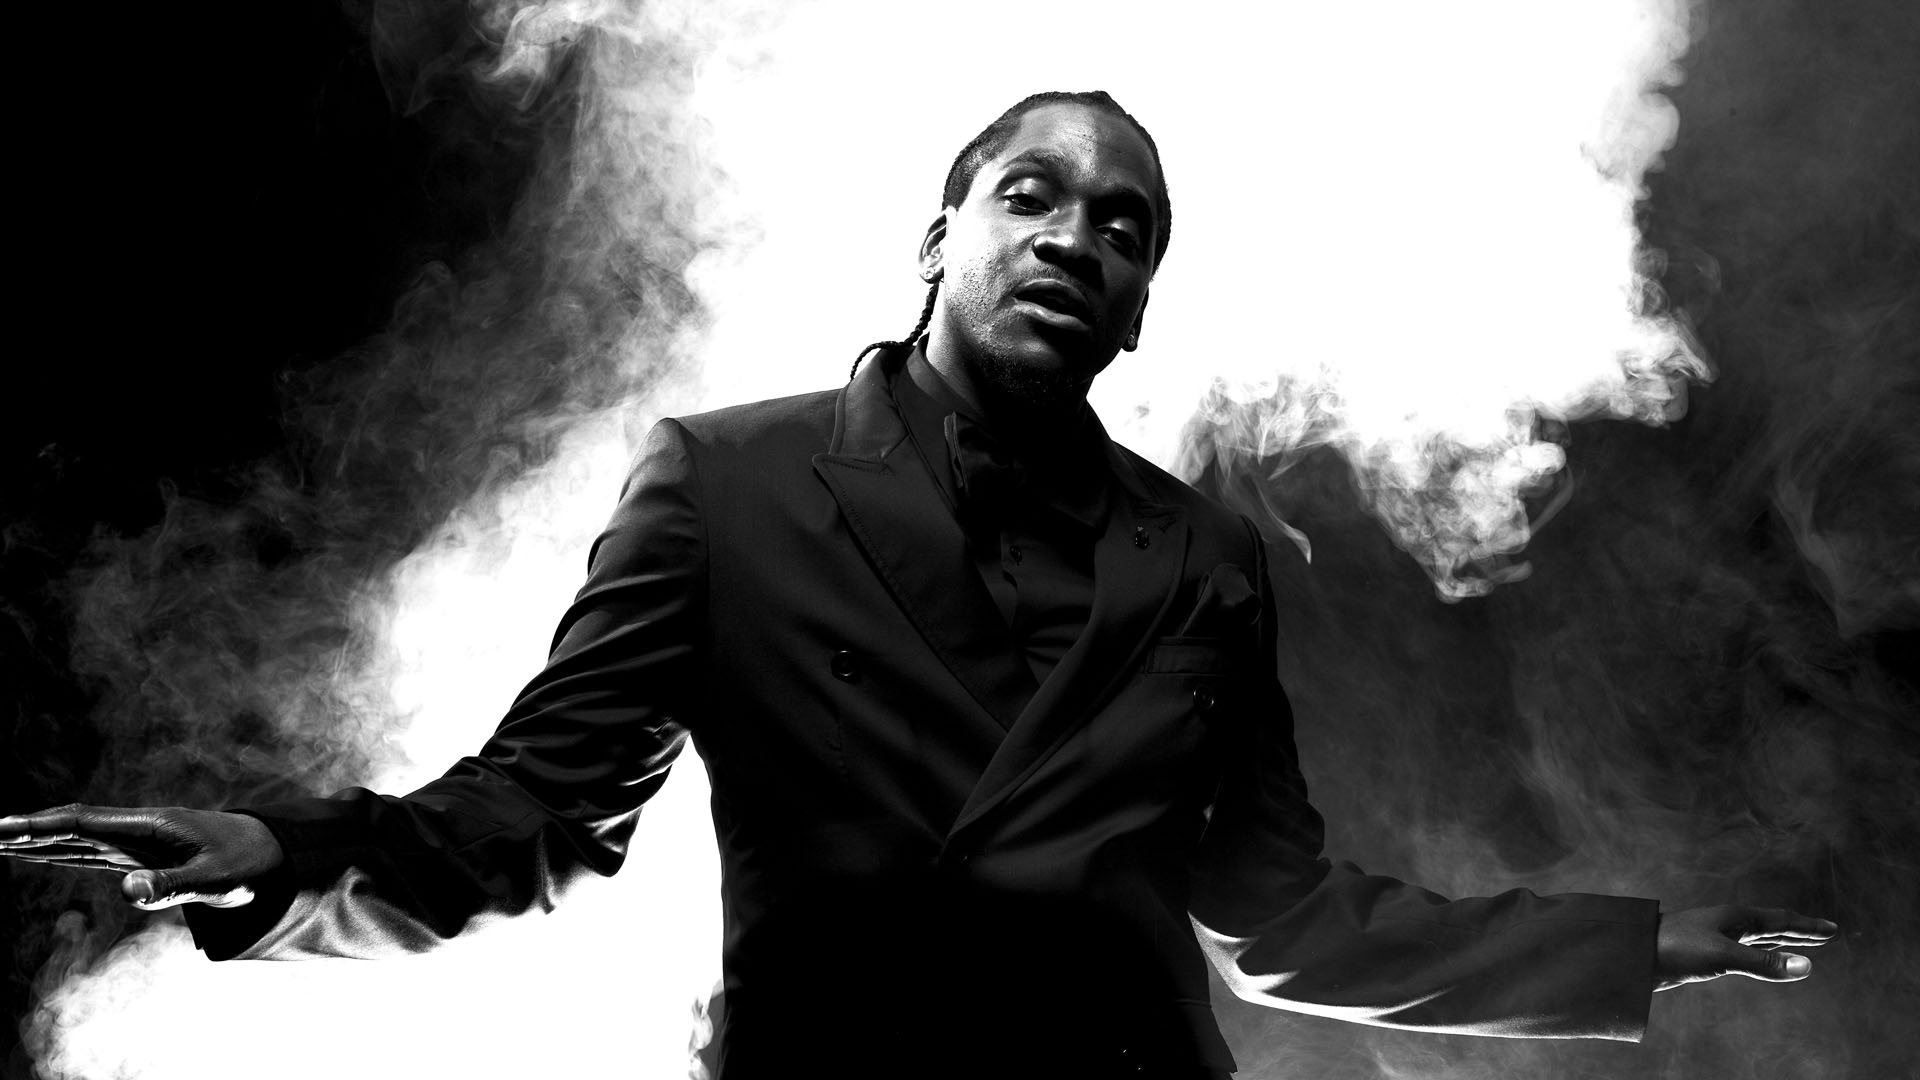 Pusha T "Numbers On The Boards" Video | @PUSHA_T